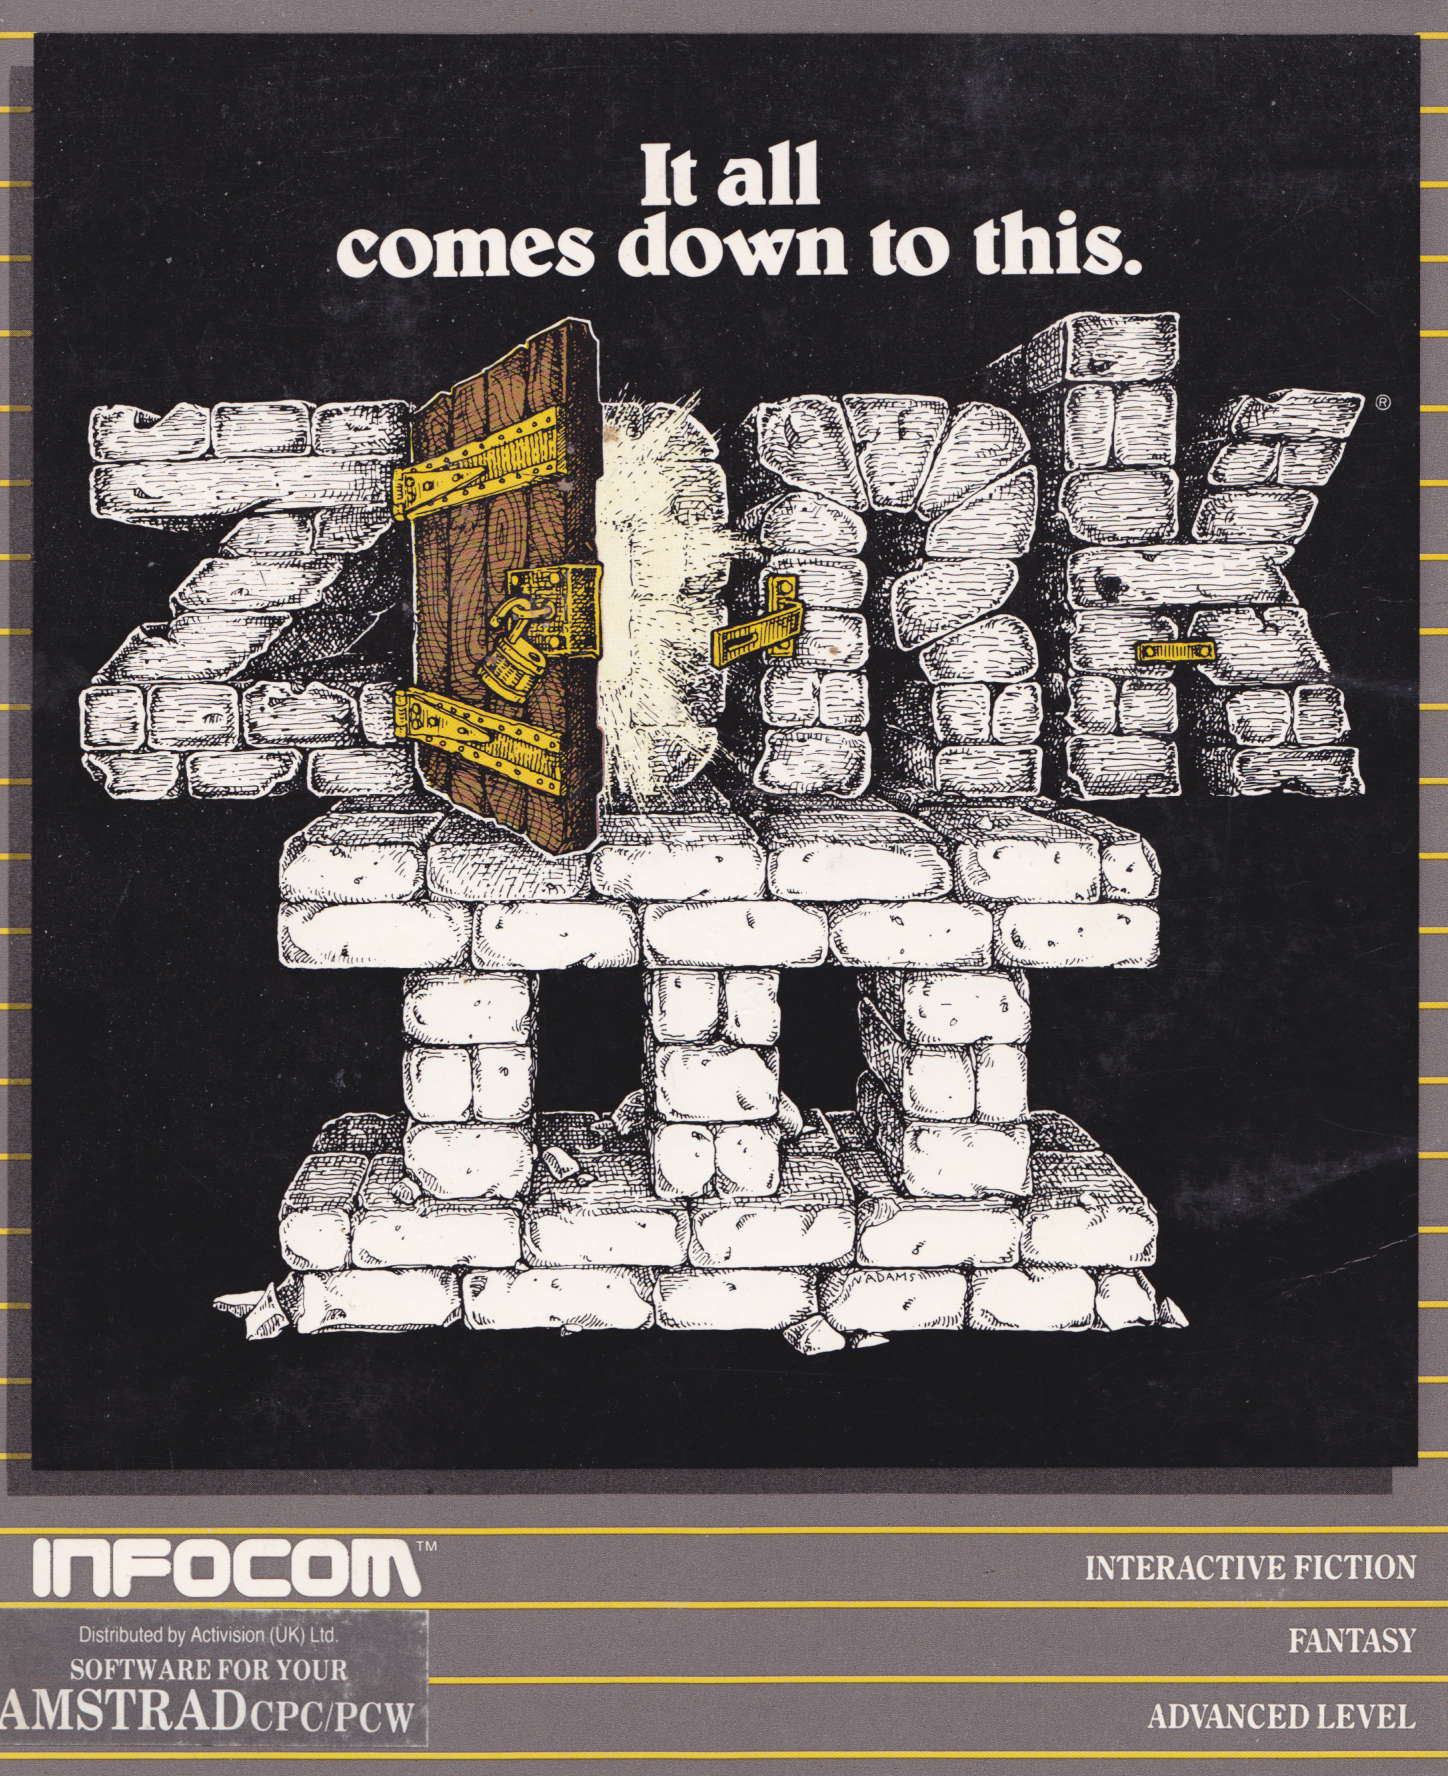 screenshot of the Amstrad CPC game Zork III: the dungeon master by GameBase CPC